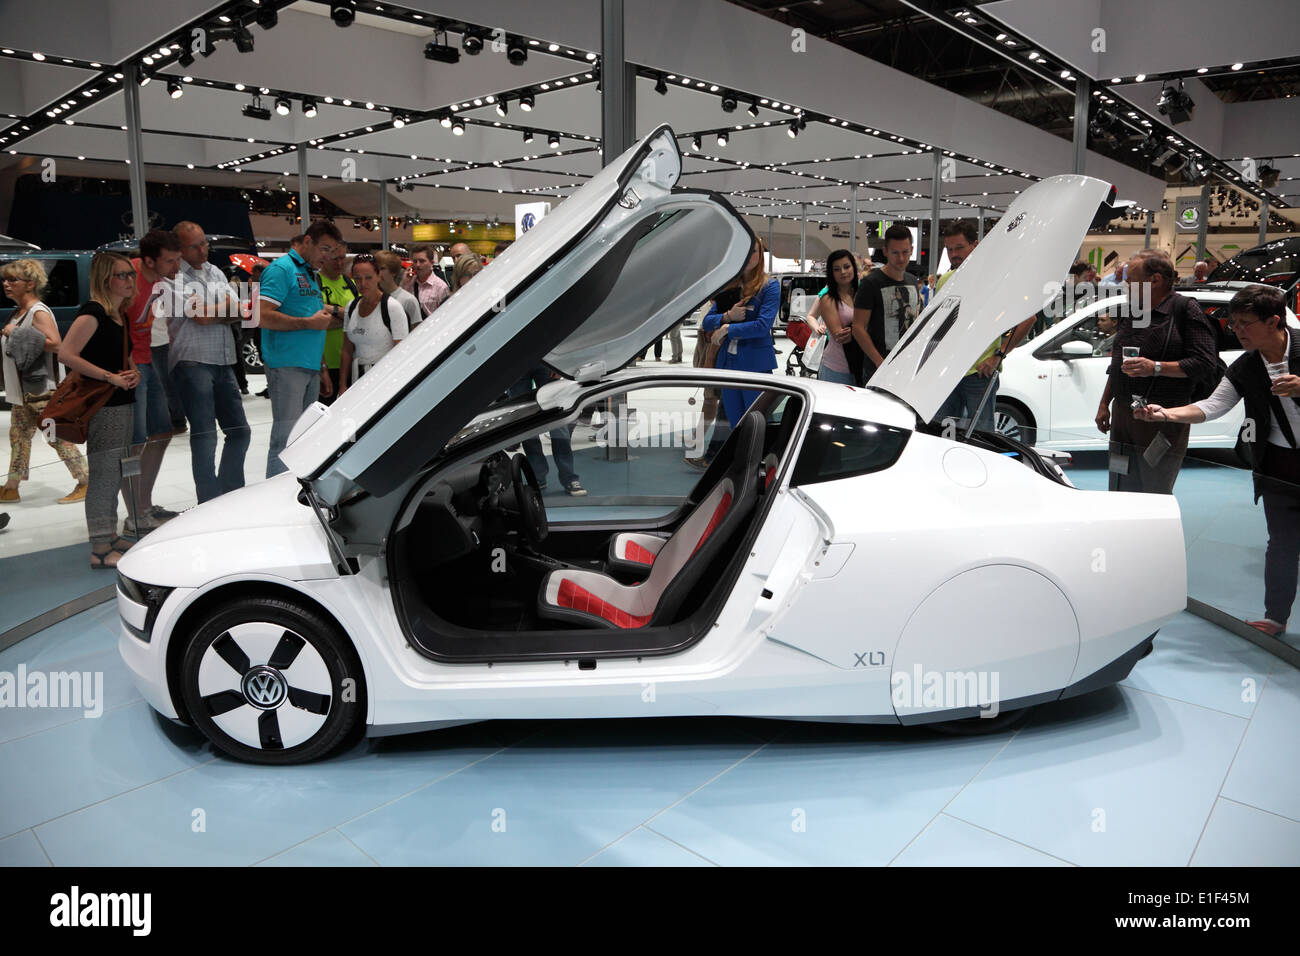 VW XL1 Concept Car at the AMI - Auto Mobile International Trade Fair on June 1st, 2014 in Leipzig, Saxony, Germany Stock Photo